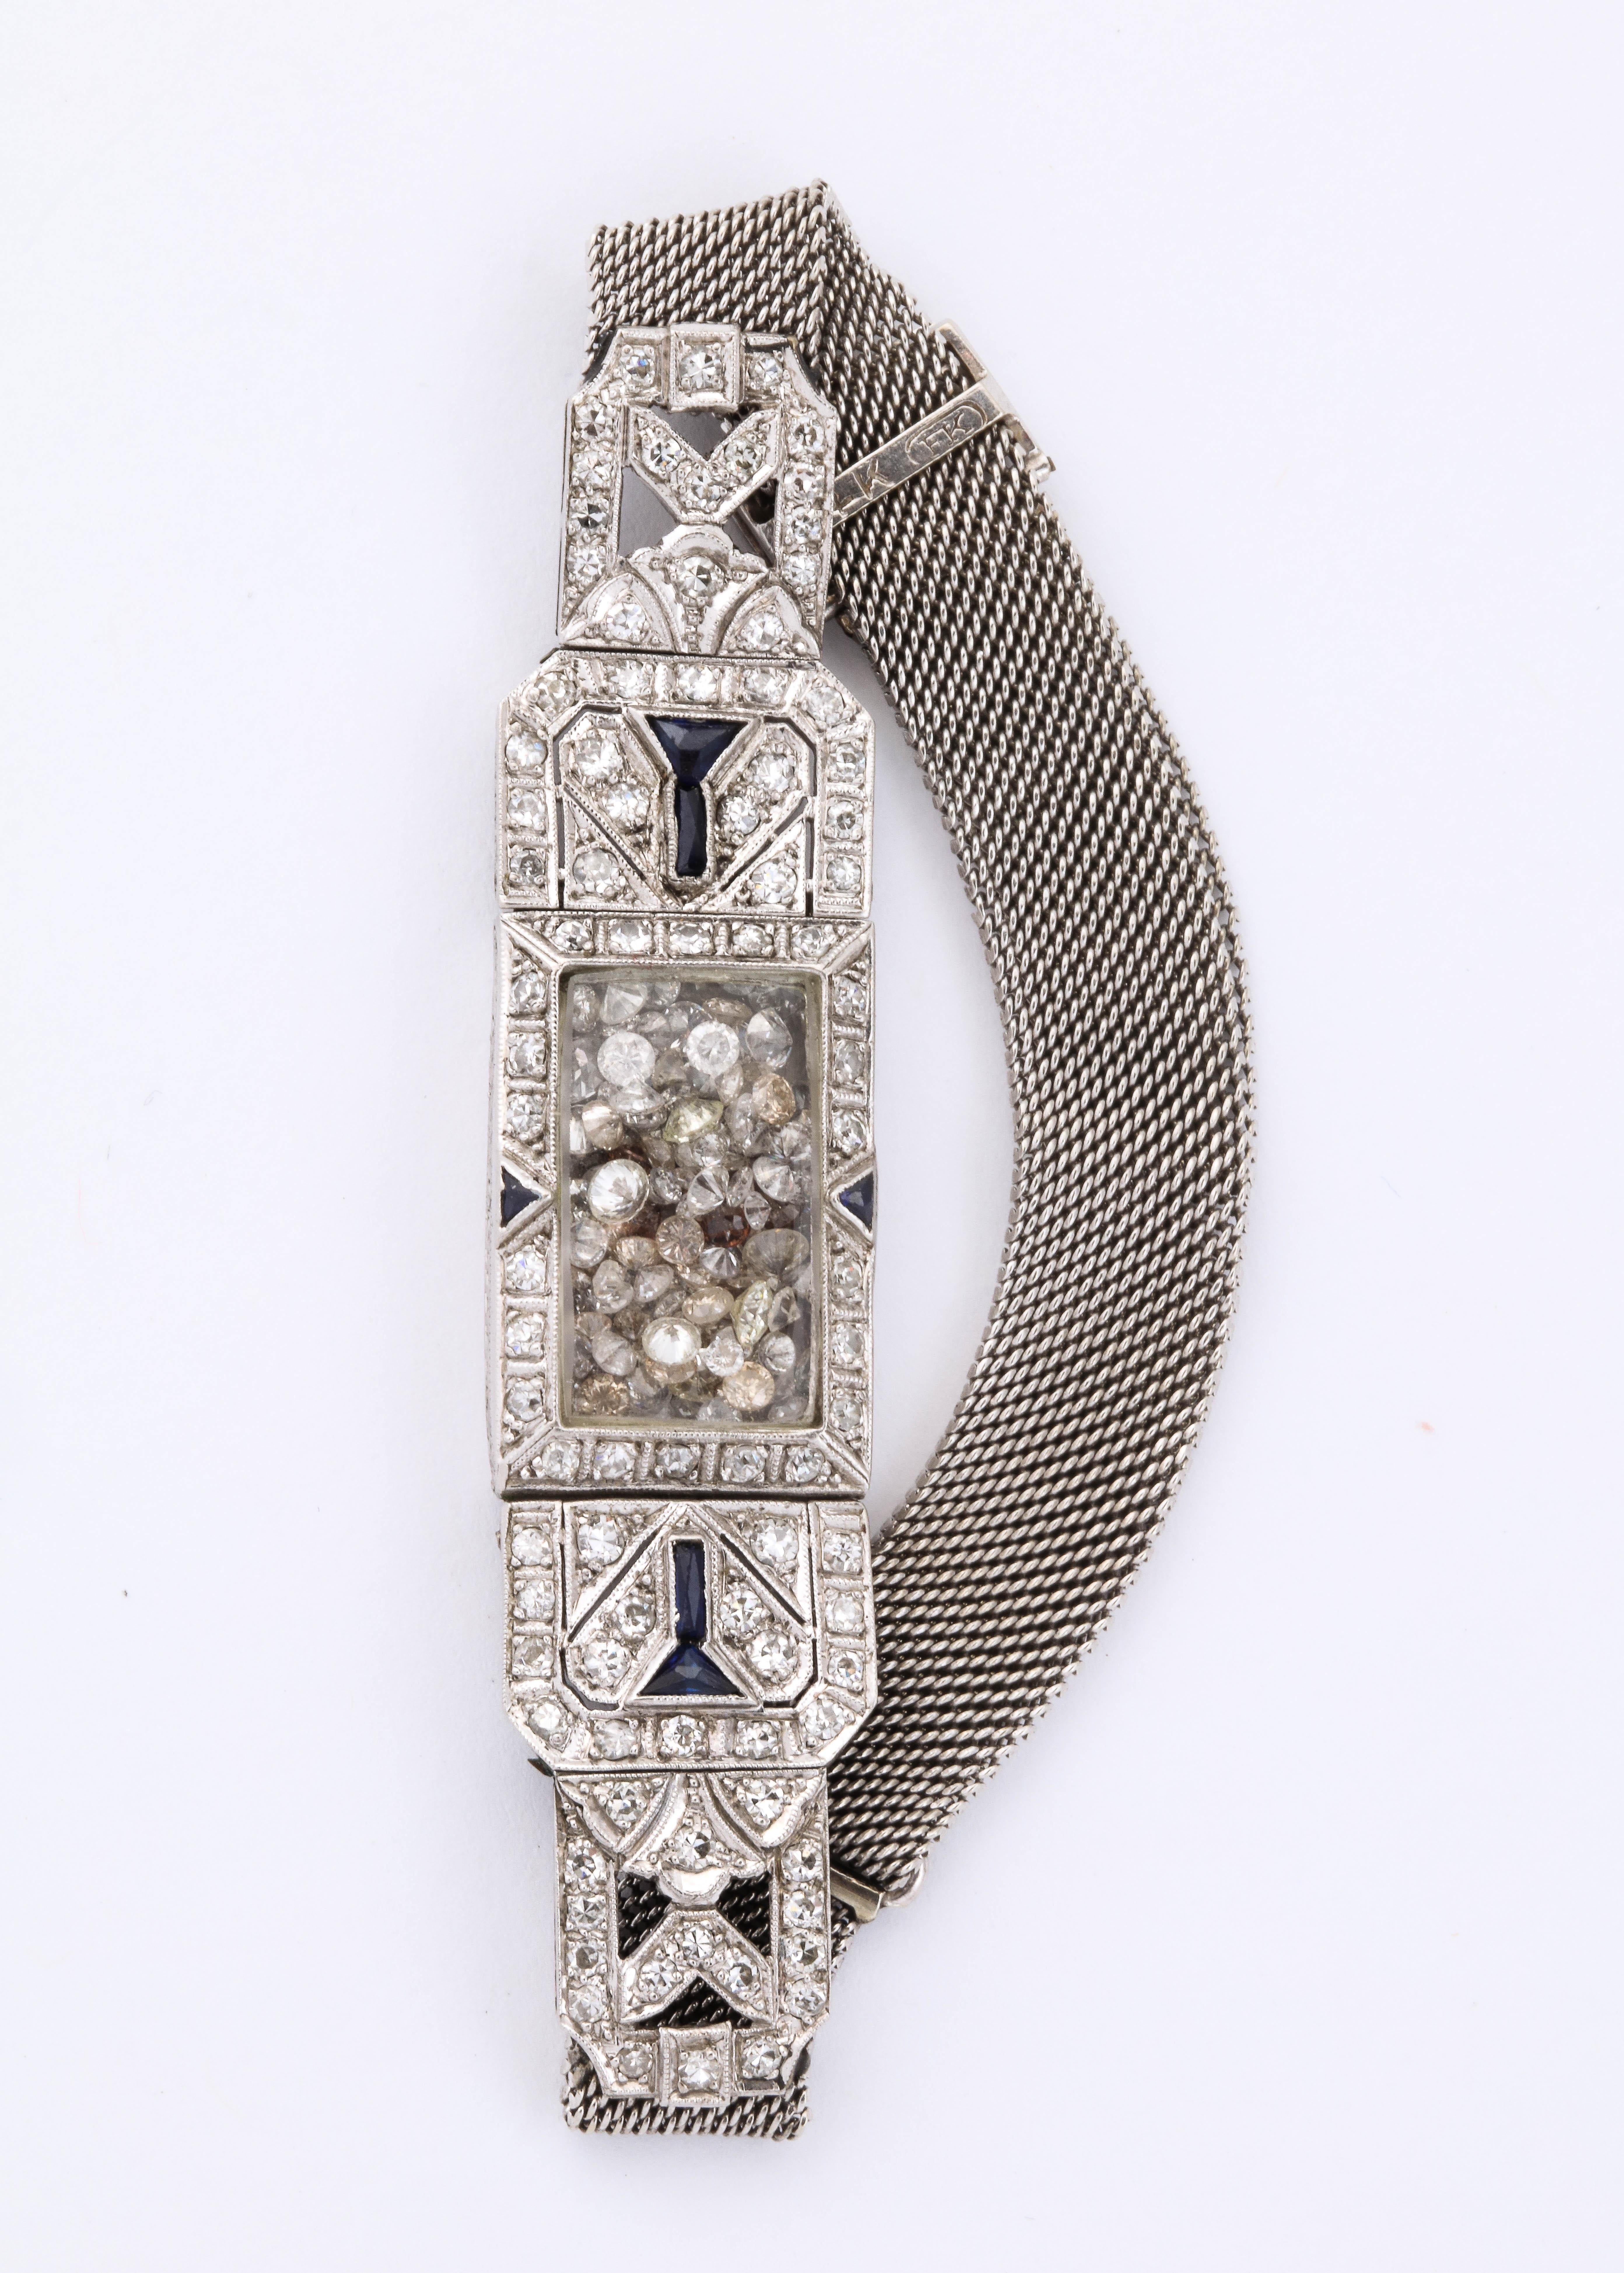 This is a repurposed diamond and platinum watch that has 2 carats of old diamonds floating where the timepiece was.  The watch is original with diamond plaquettes in a deco design with a few onyx accents.
It looks great on its own and can be worn